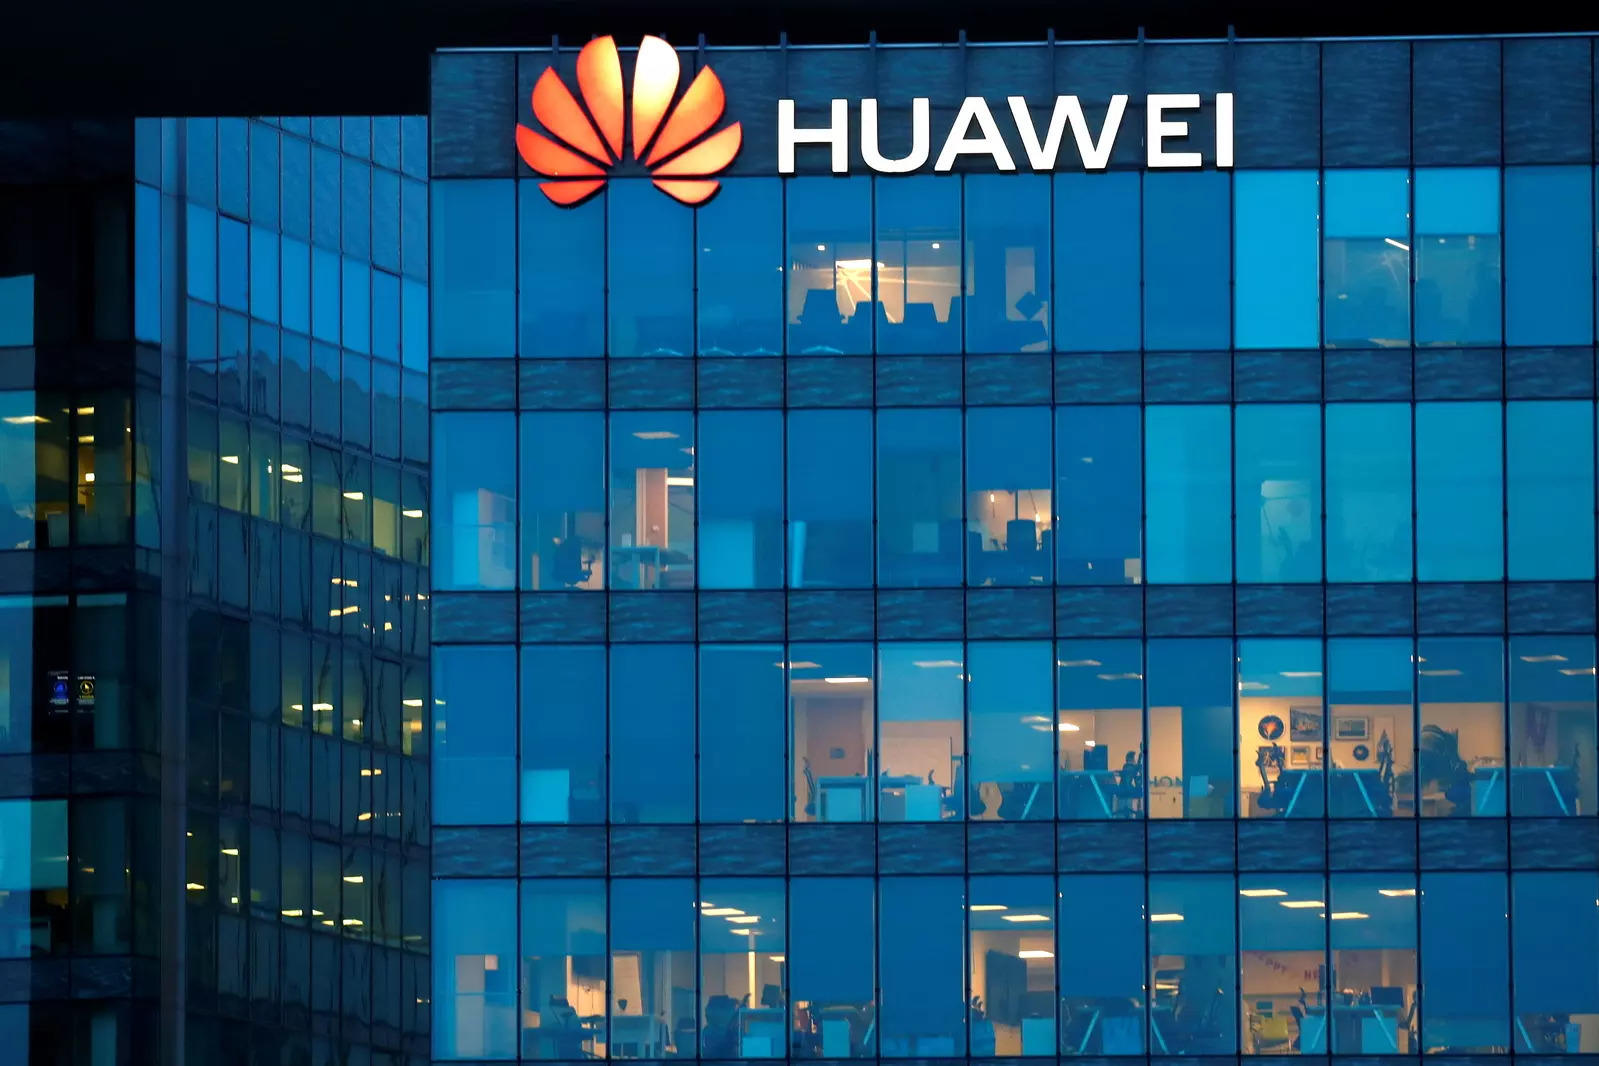 Huawei chief and founder Ren Zhengfei last month called for a reset with the United States under President Joe Biden, after the firm was battered by sanctions imposed by Donald Trump's administration.